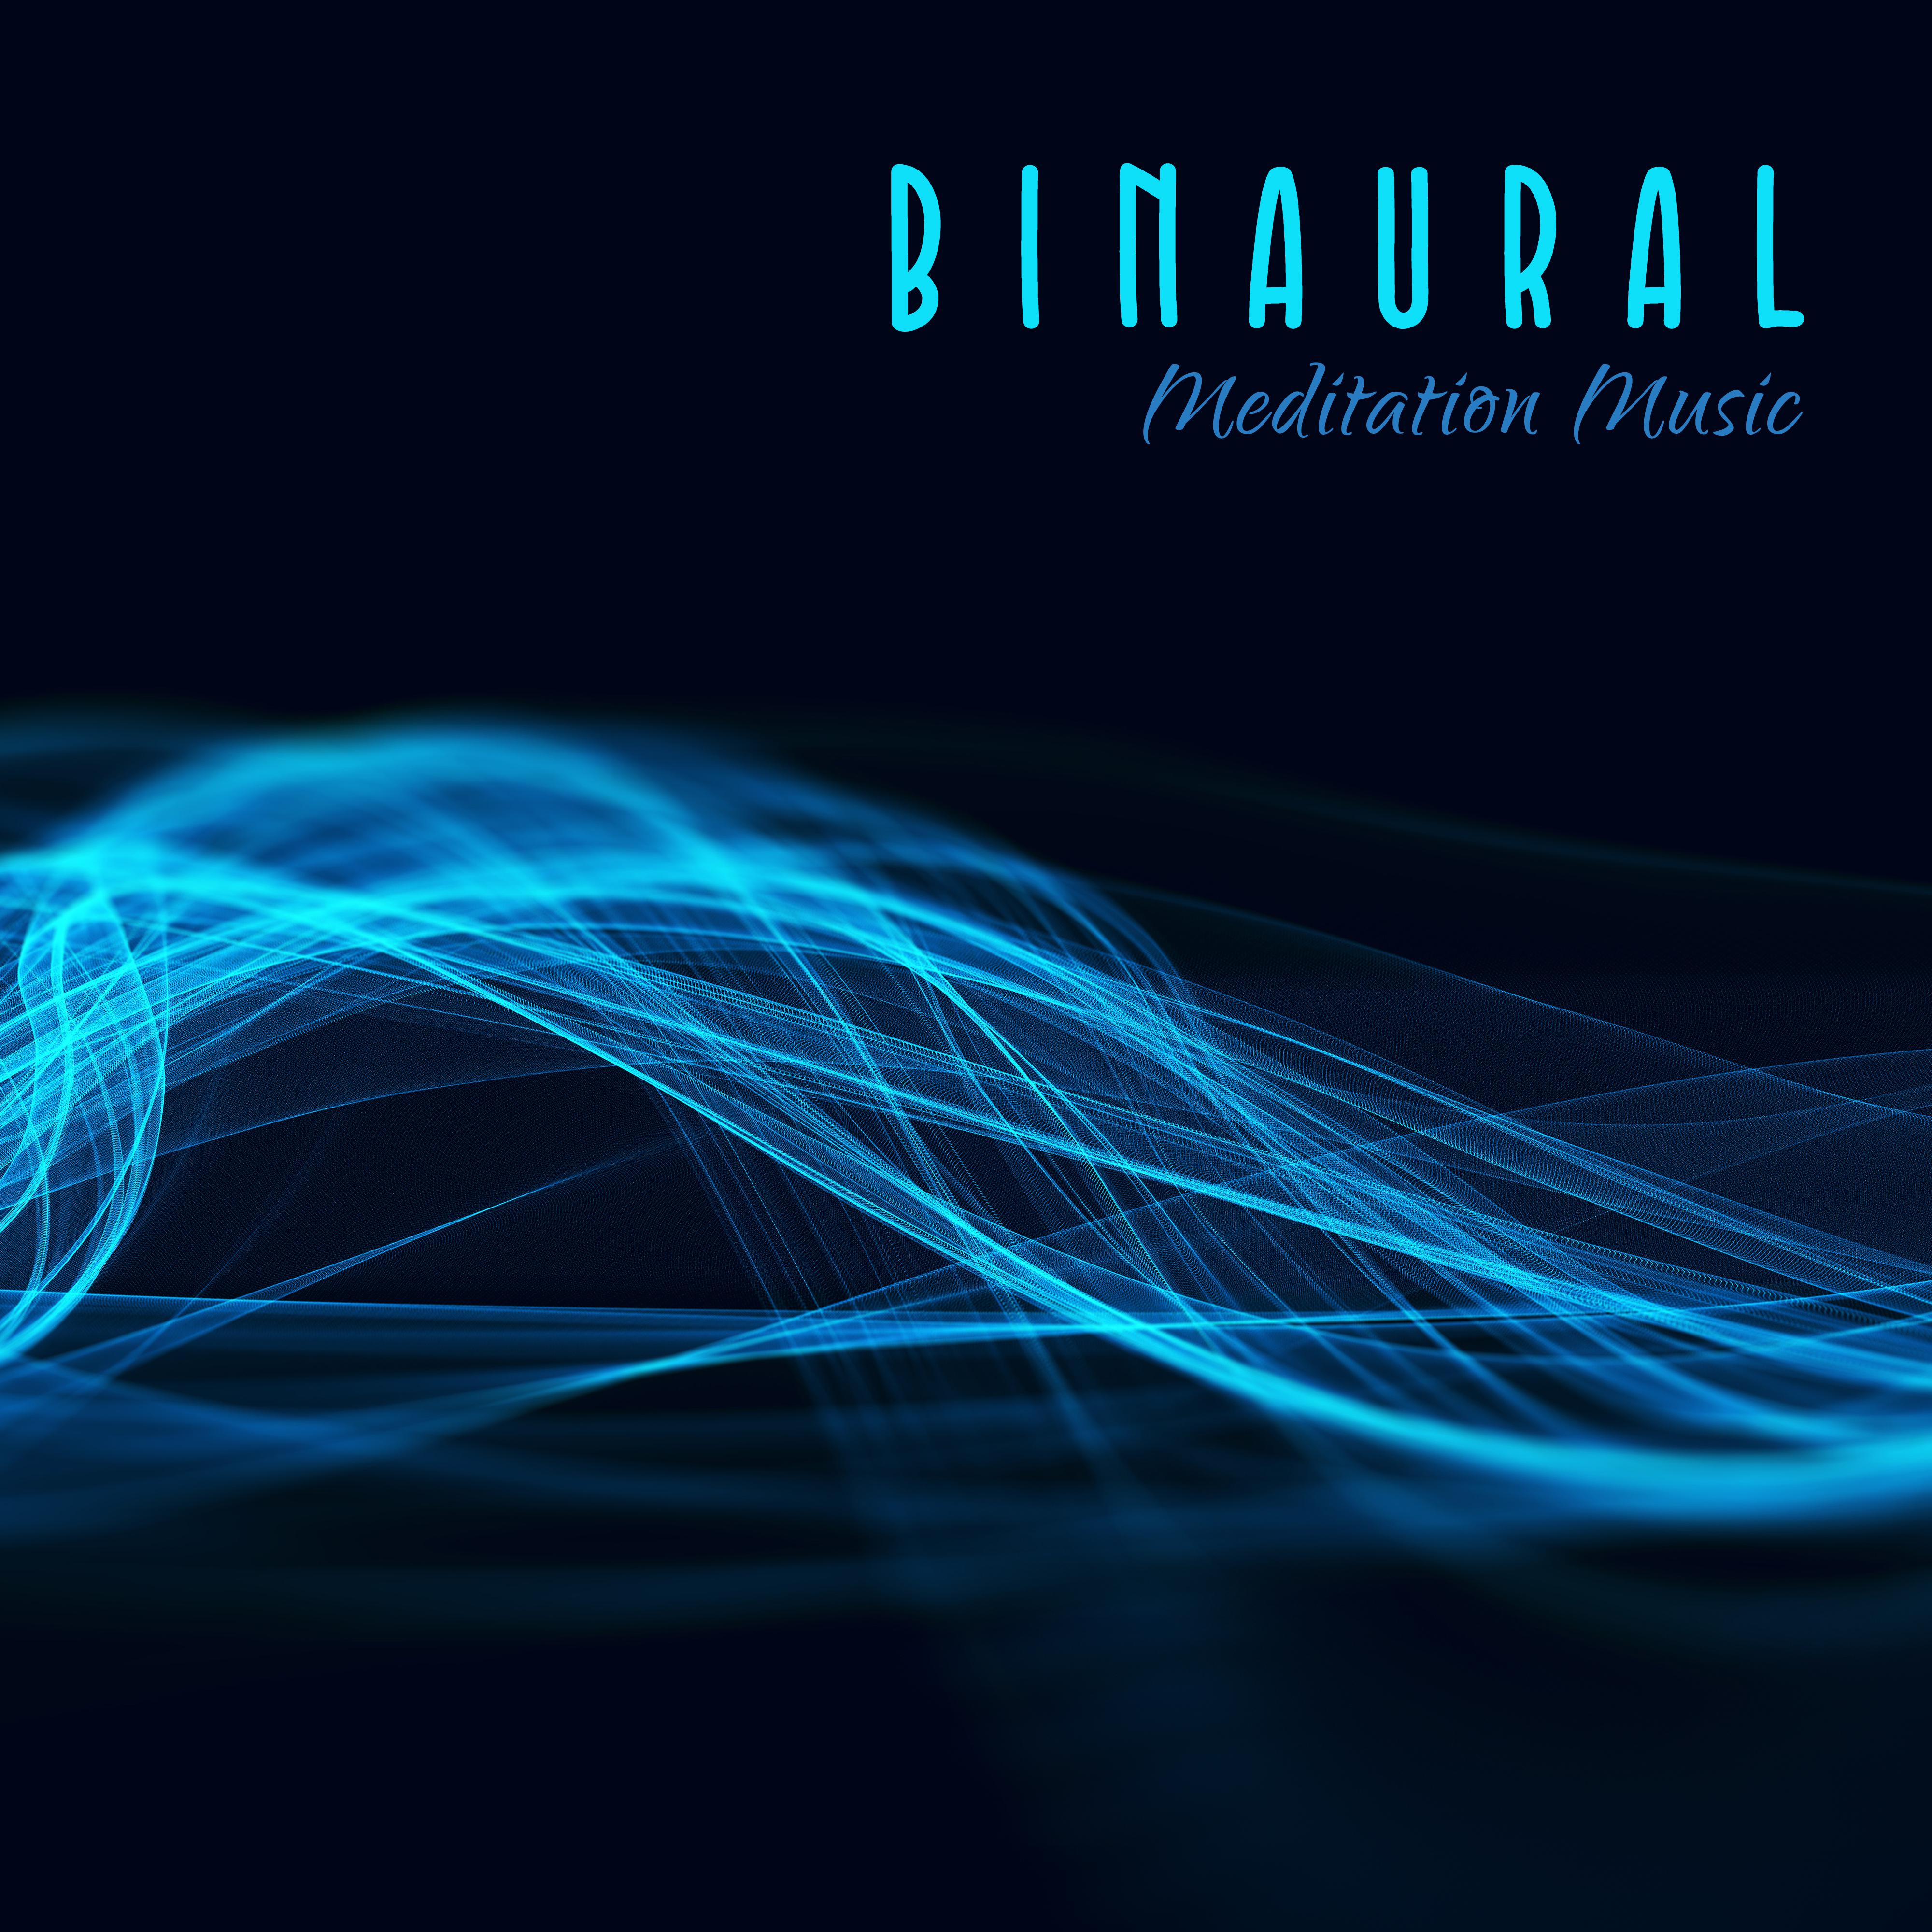 Binaural Meditation Music: 15 Songs for Sleep, Healing, Meditation, Yoga Exercises, Reiki, Reduce Stress & Anxiety, Concentration and Focus